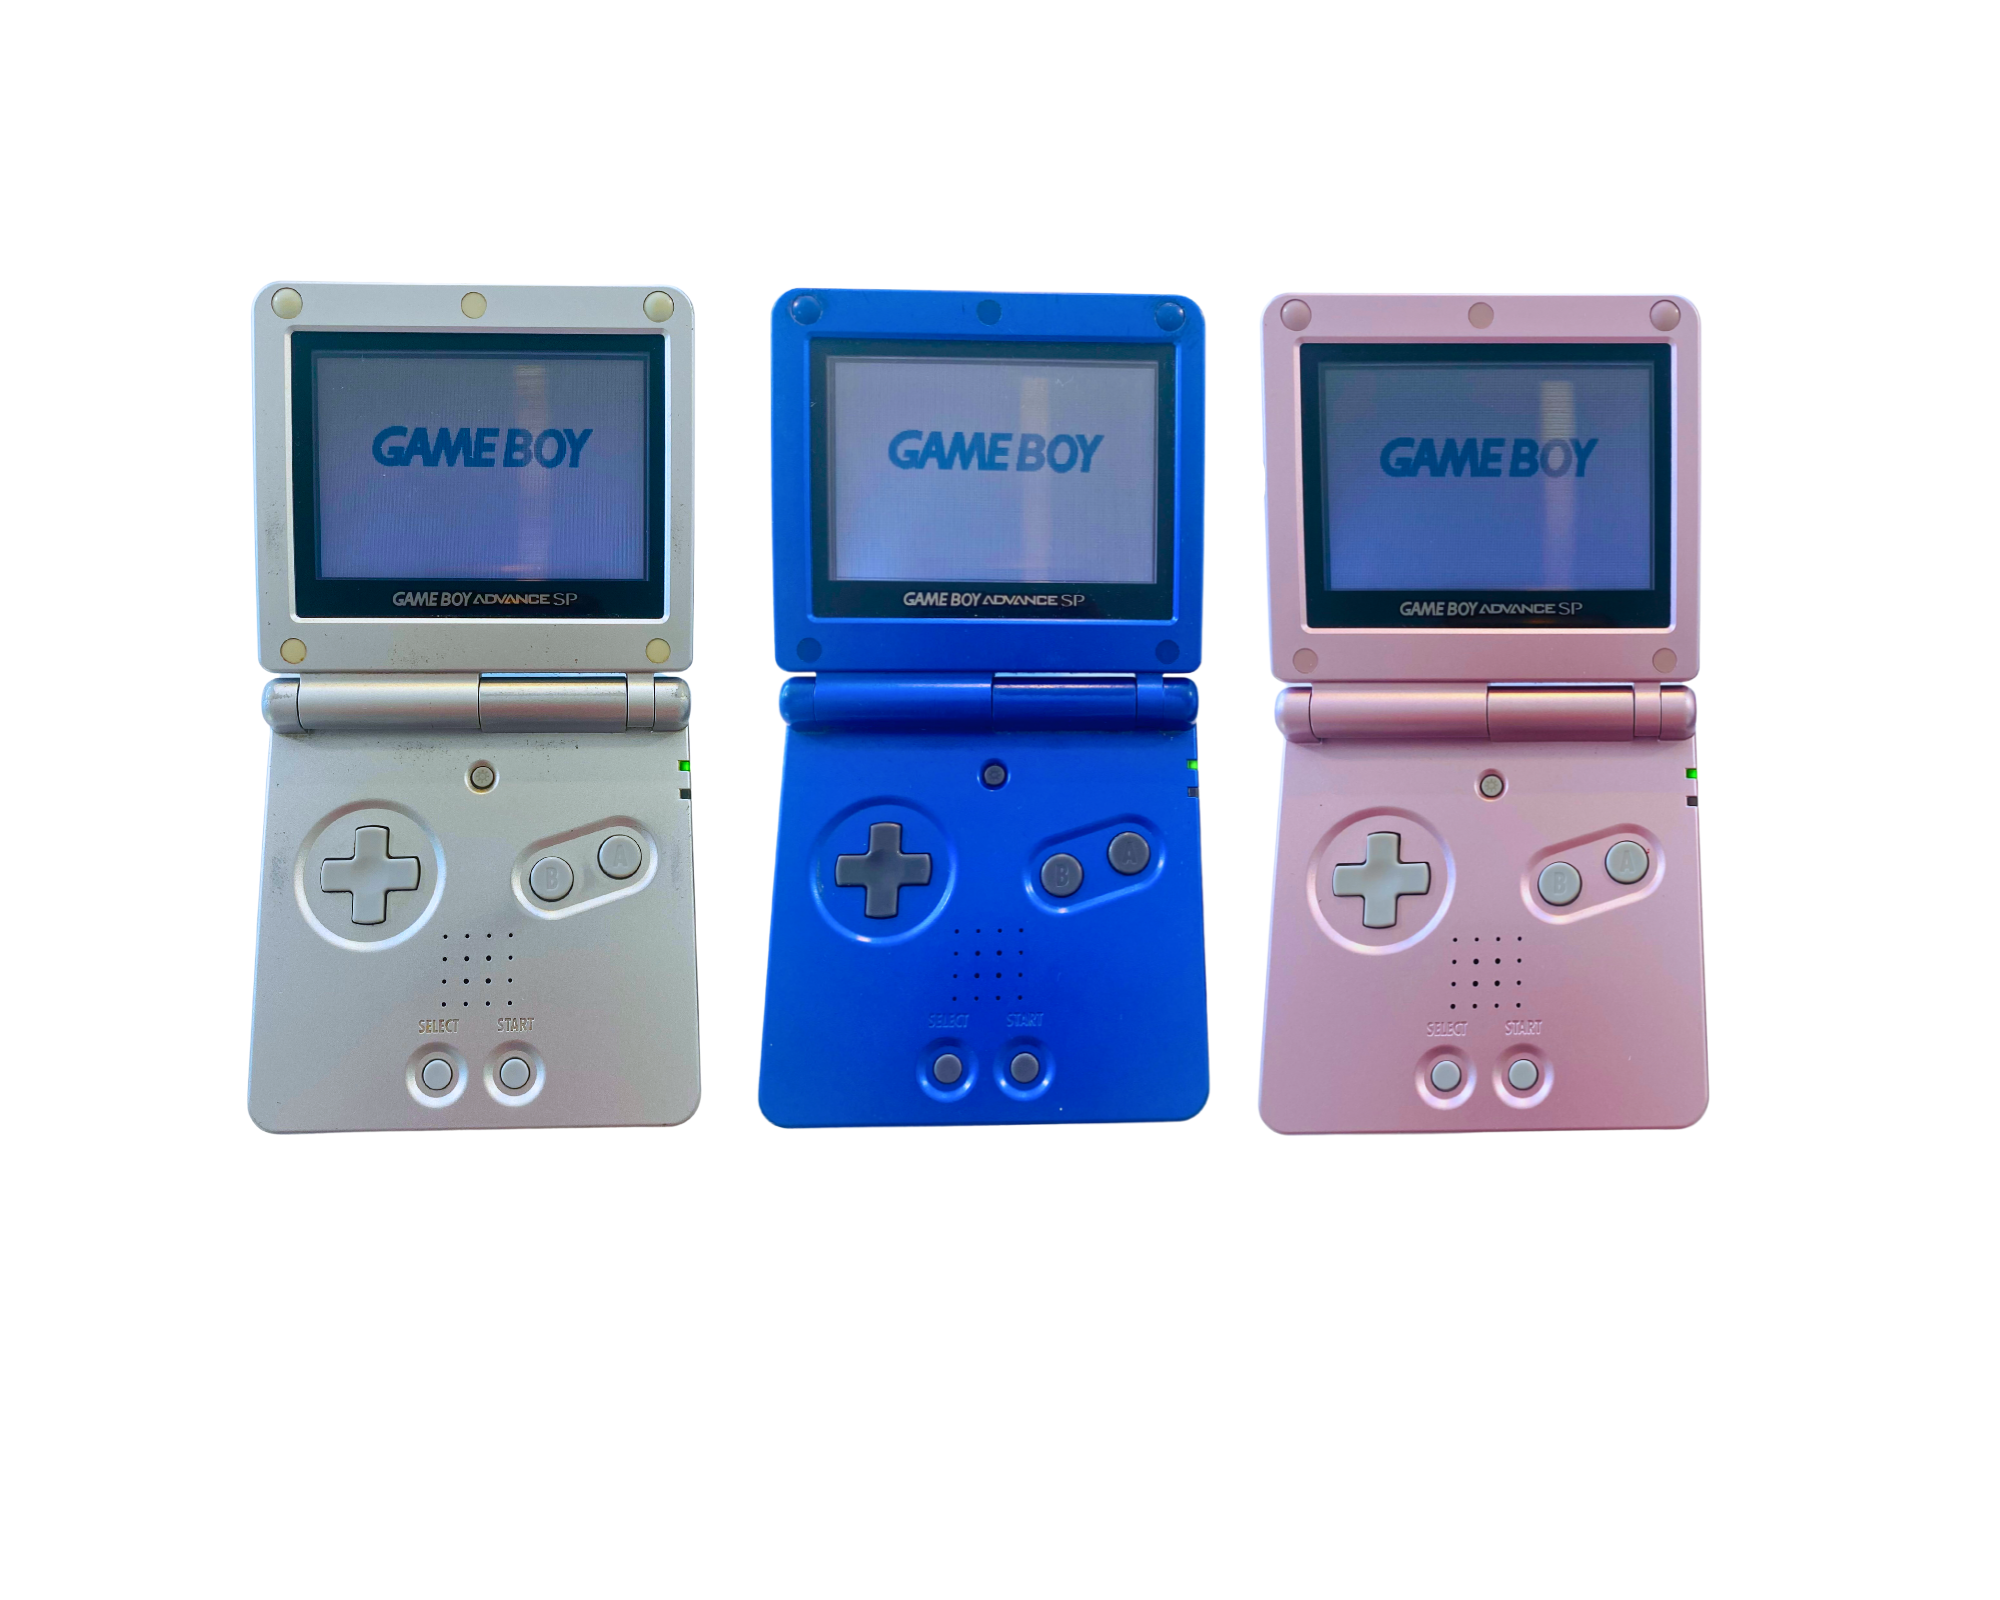 Nintendo Game Boy Advance SP Gaming Console (Pearl Pink)